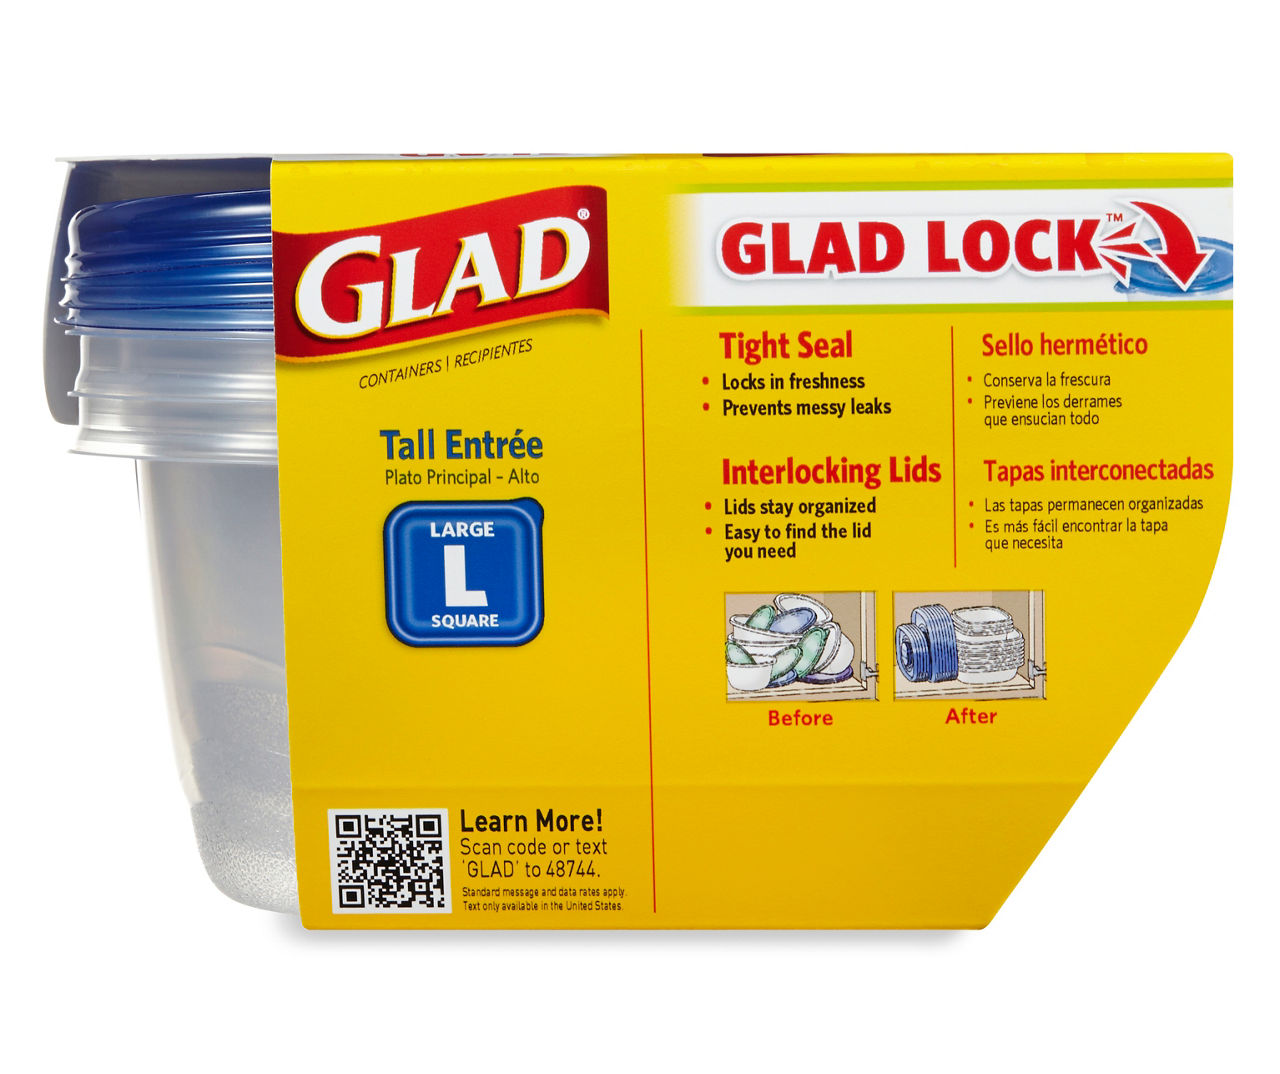 Glad Tall Entree Food Storage Containers, 3-Pack